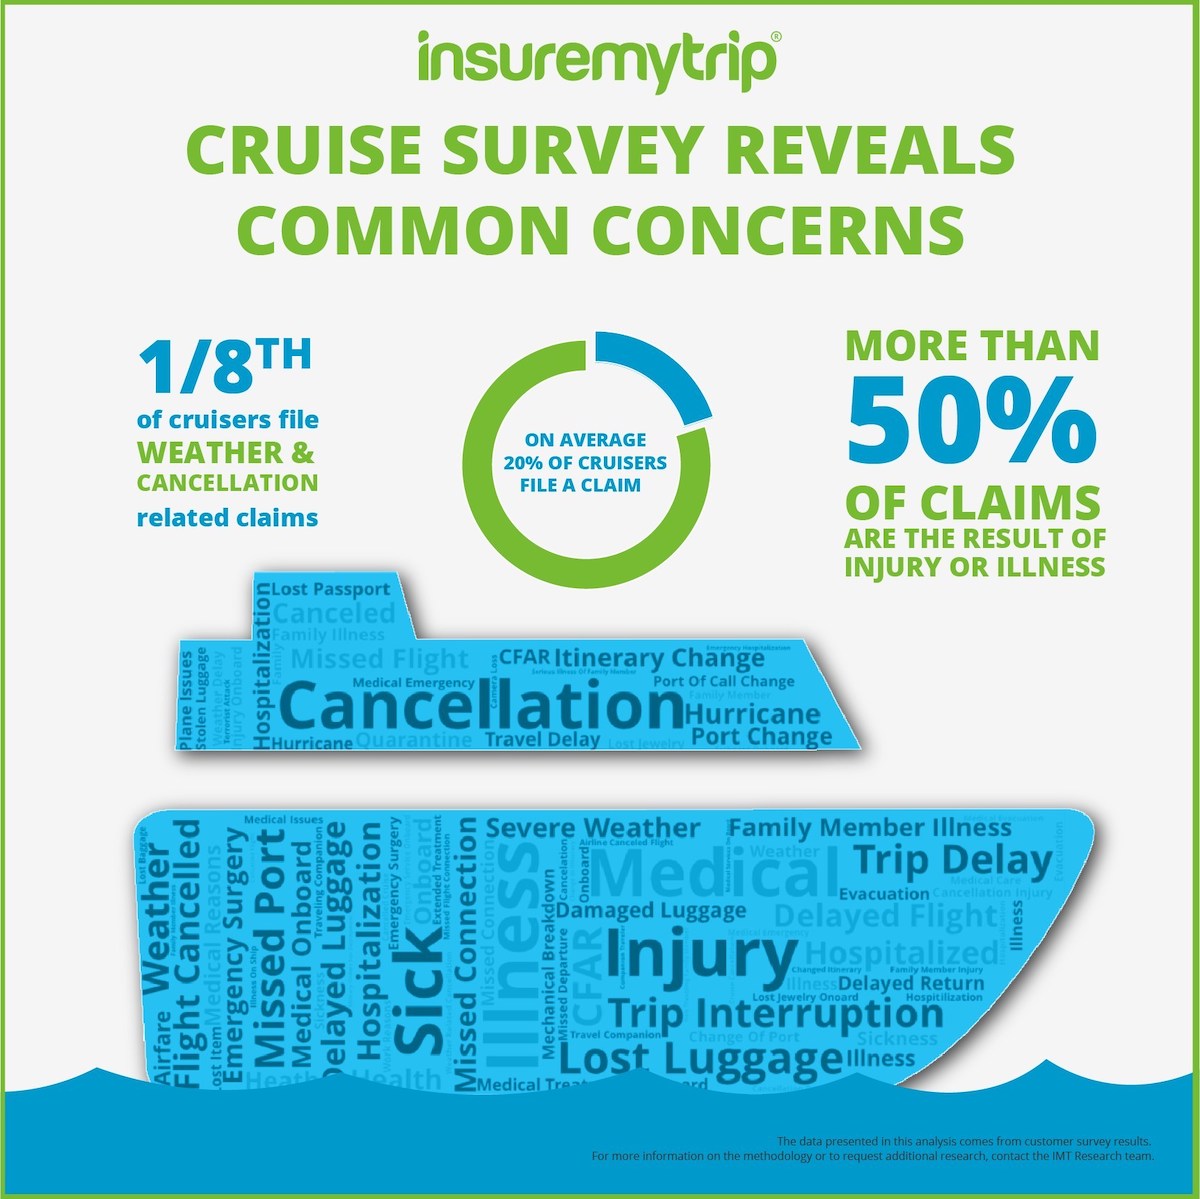 Top Concerns Among Cruise Vacationers 2020